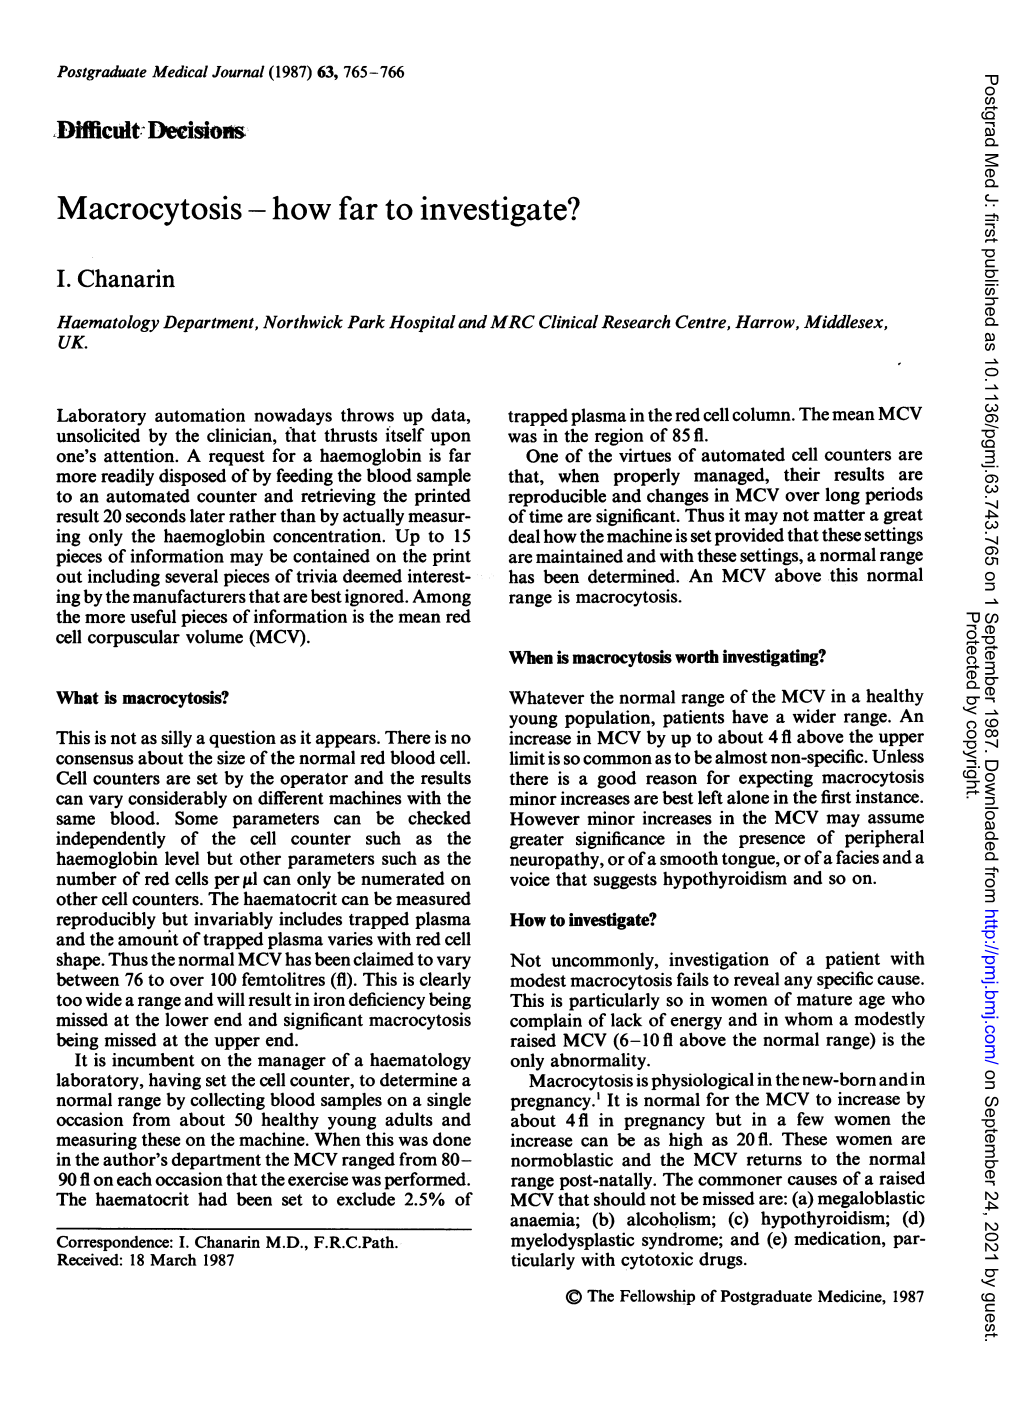 Macrocytosis - How Far to Investigate?